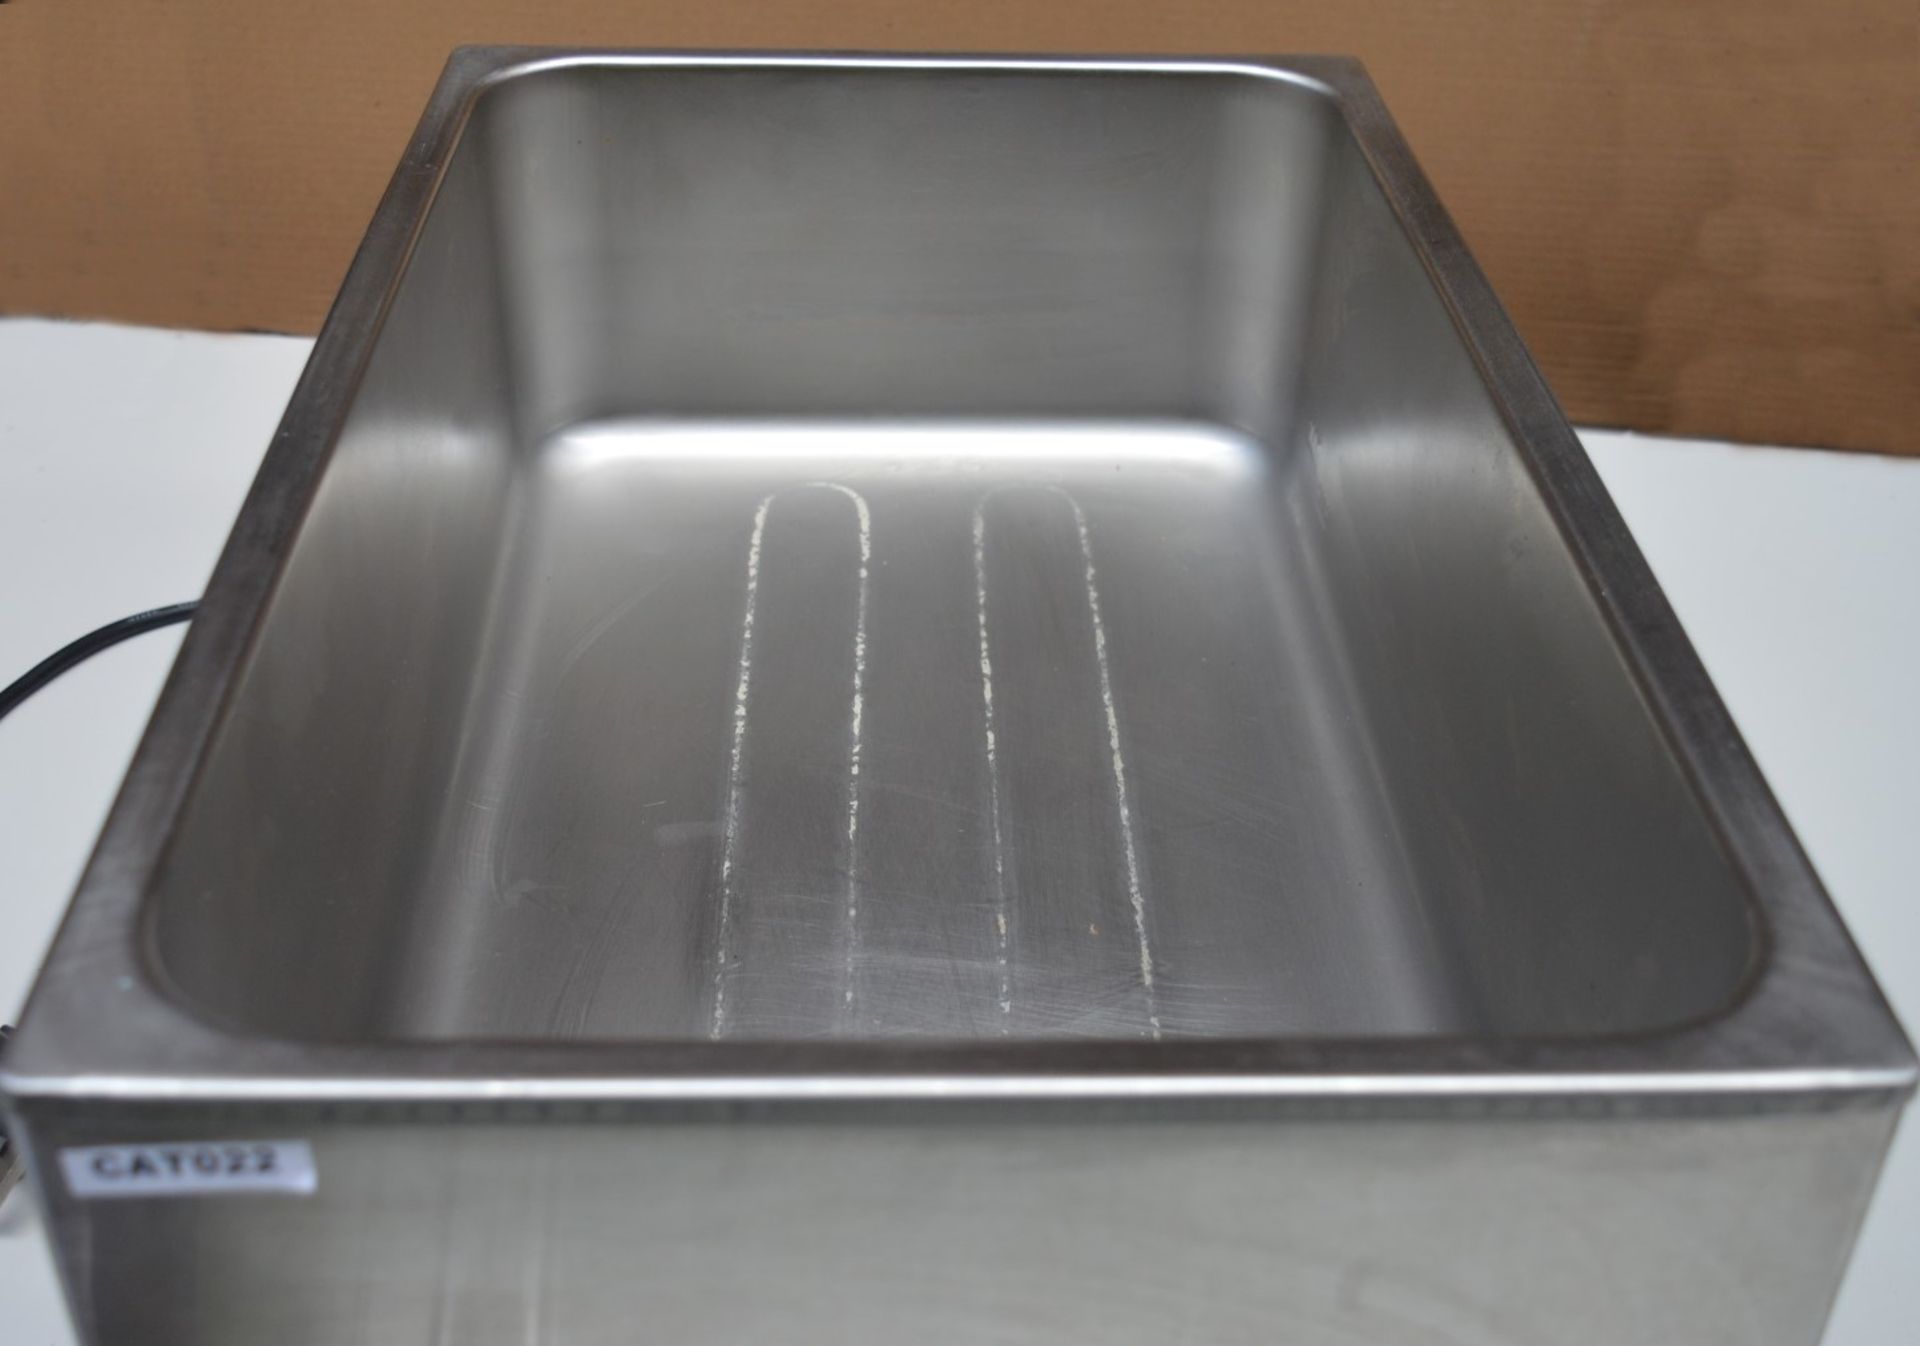 1 x Buffalo L310 Wet Heat Bain Marie With Tap - CL164 - Ideal For Serving Foods Such as Pasta and - Image 6 of 8